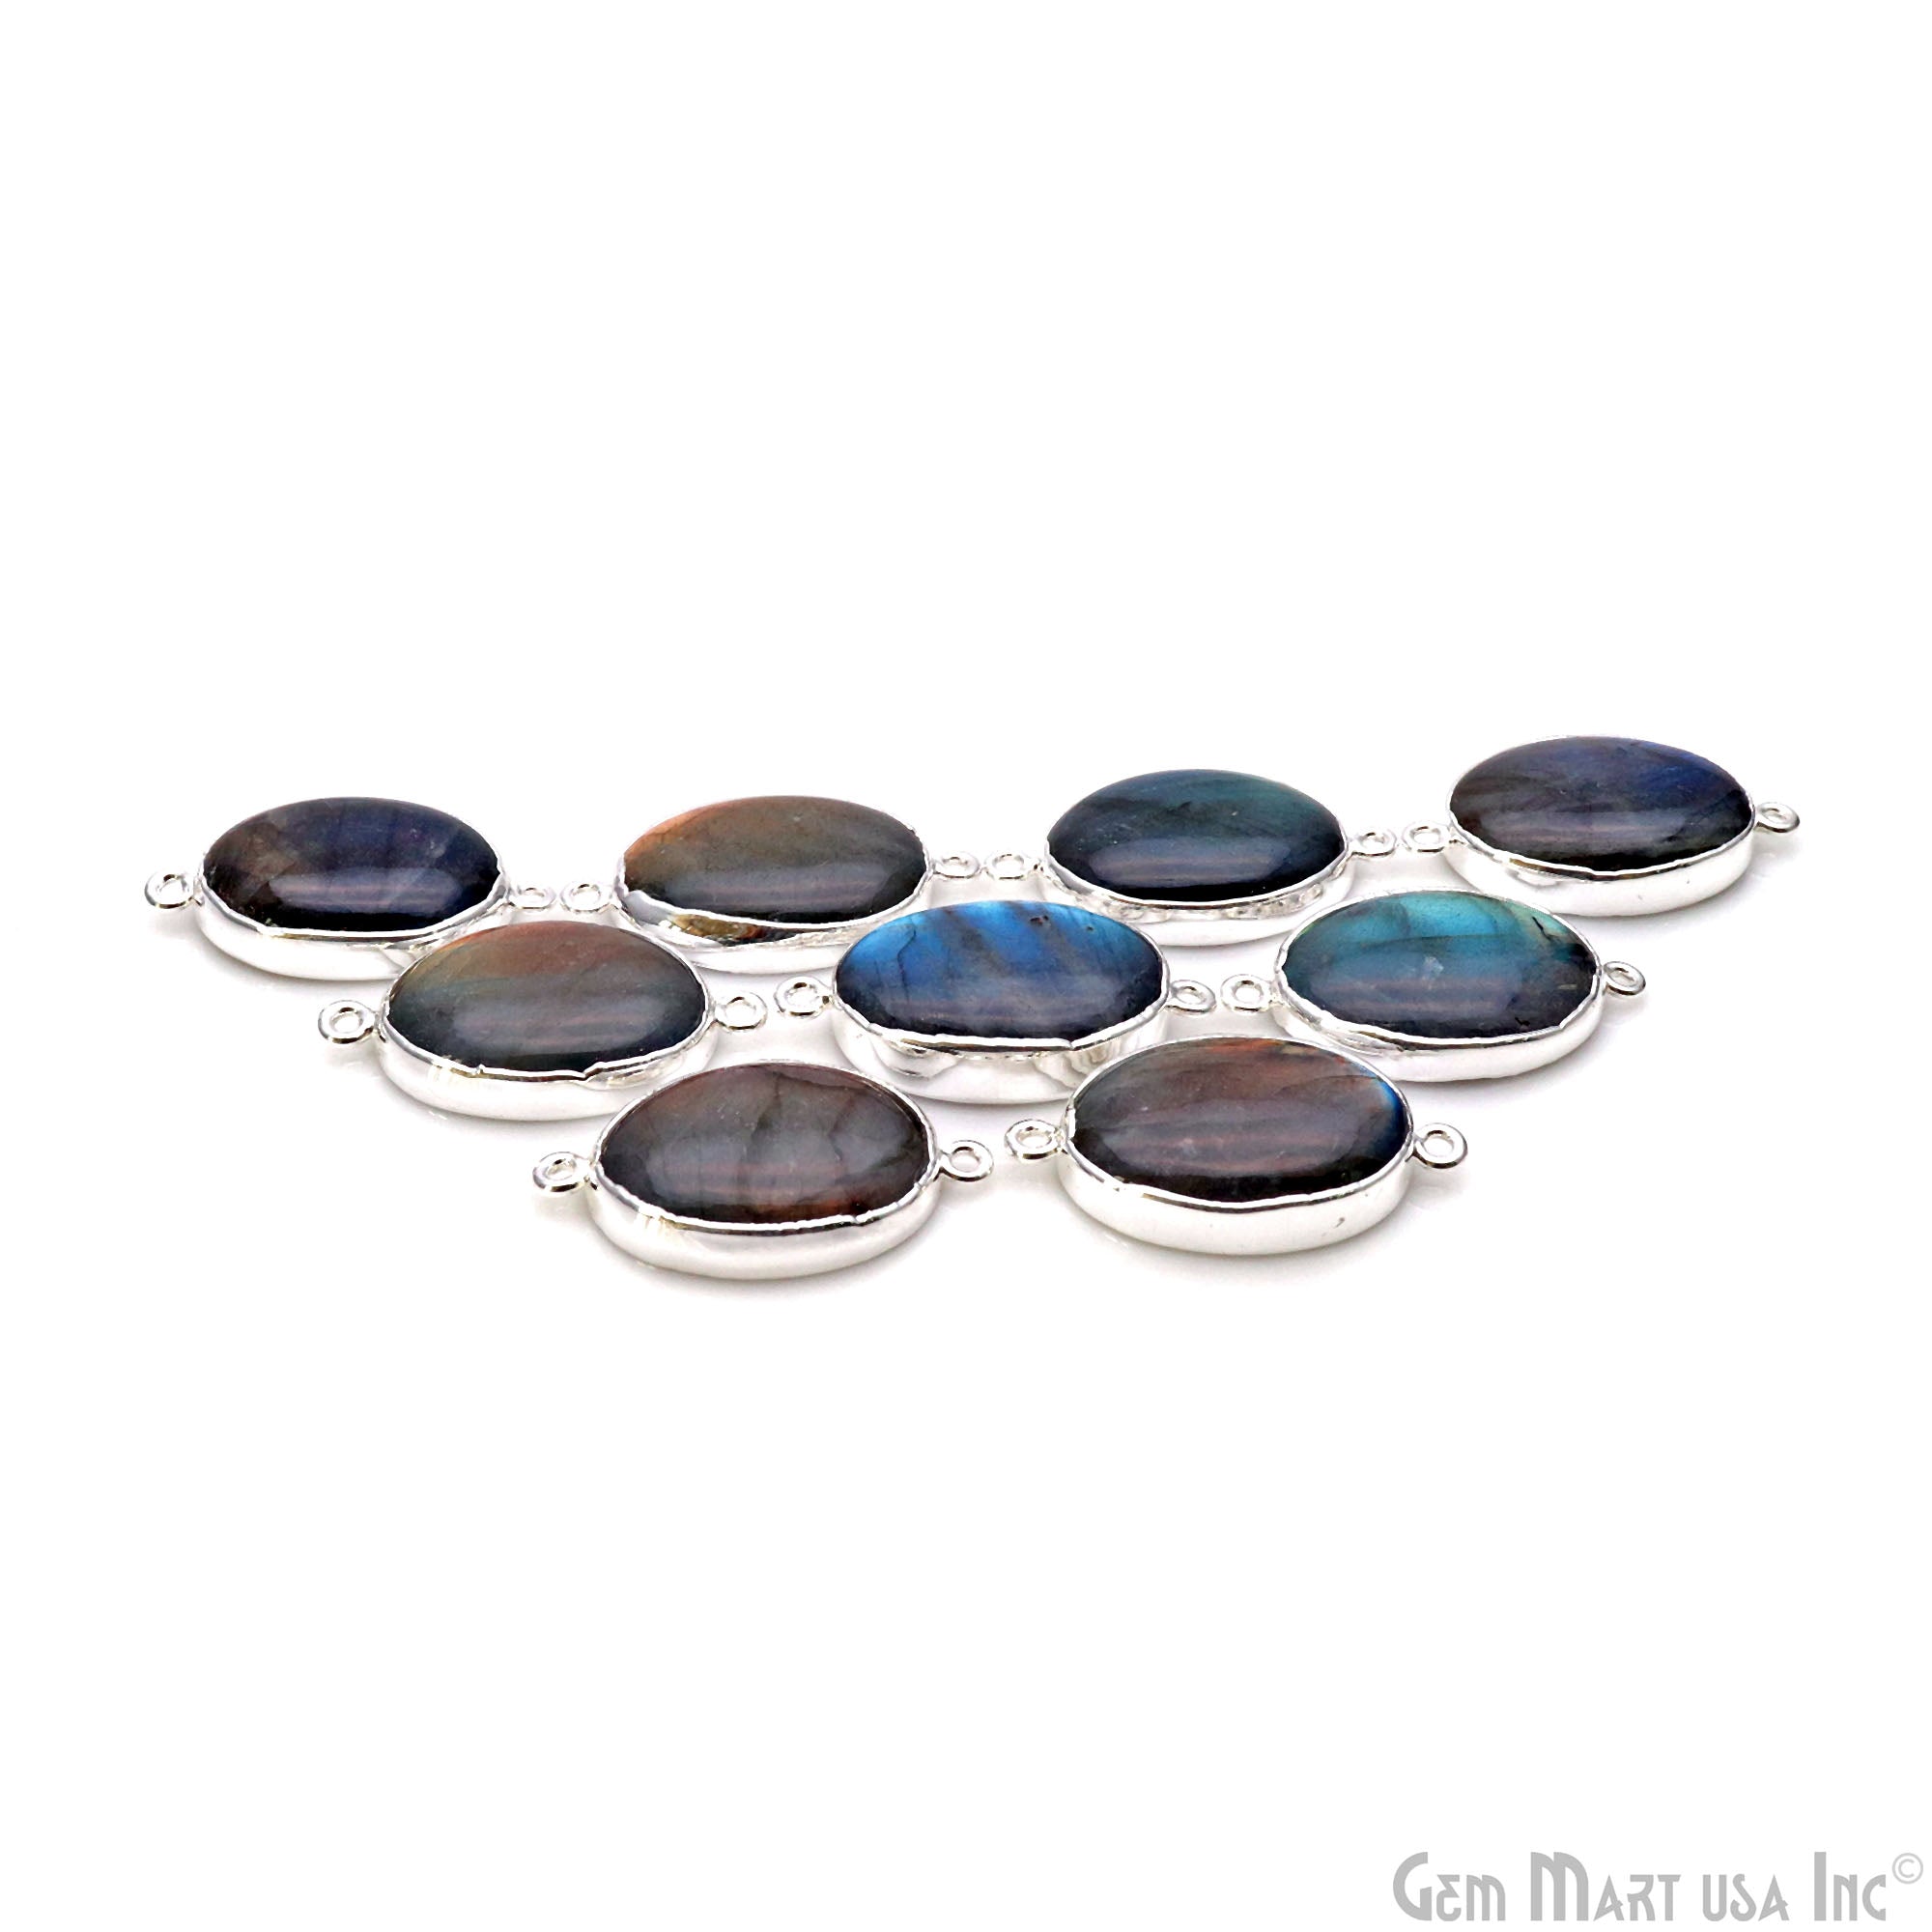 Flashy Labradorite 32x18mm Cabochon Oval Double Bail Silver Electroplated Gemstone Connector